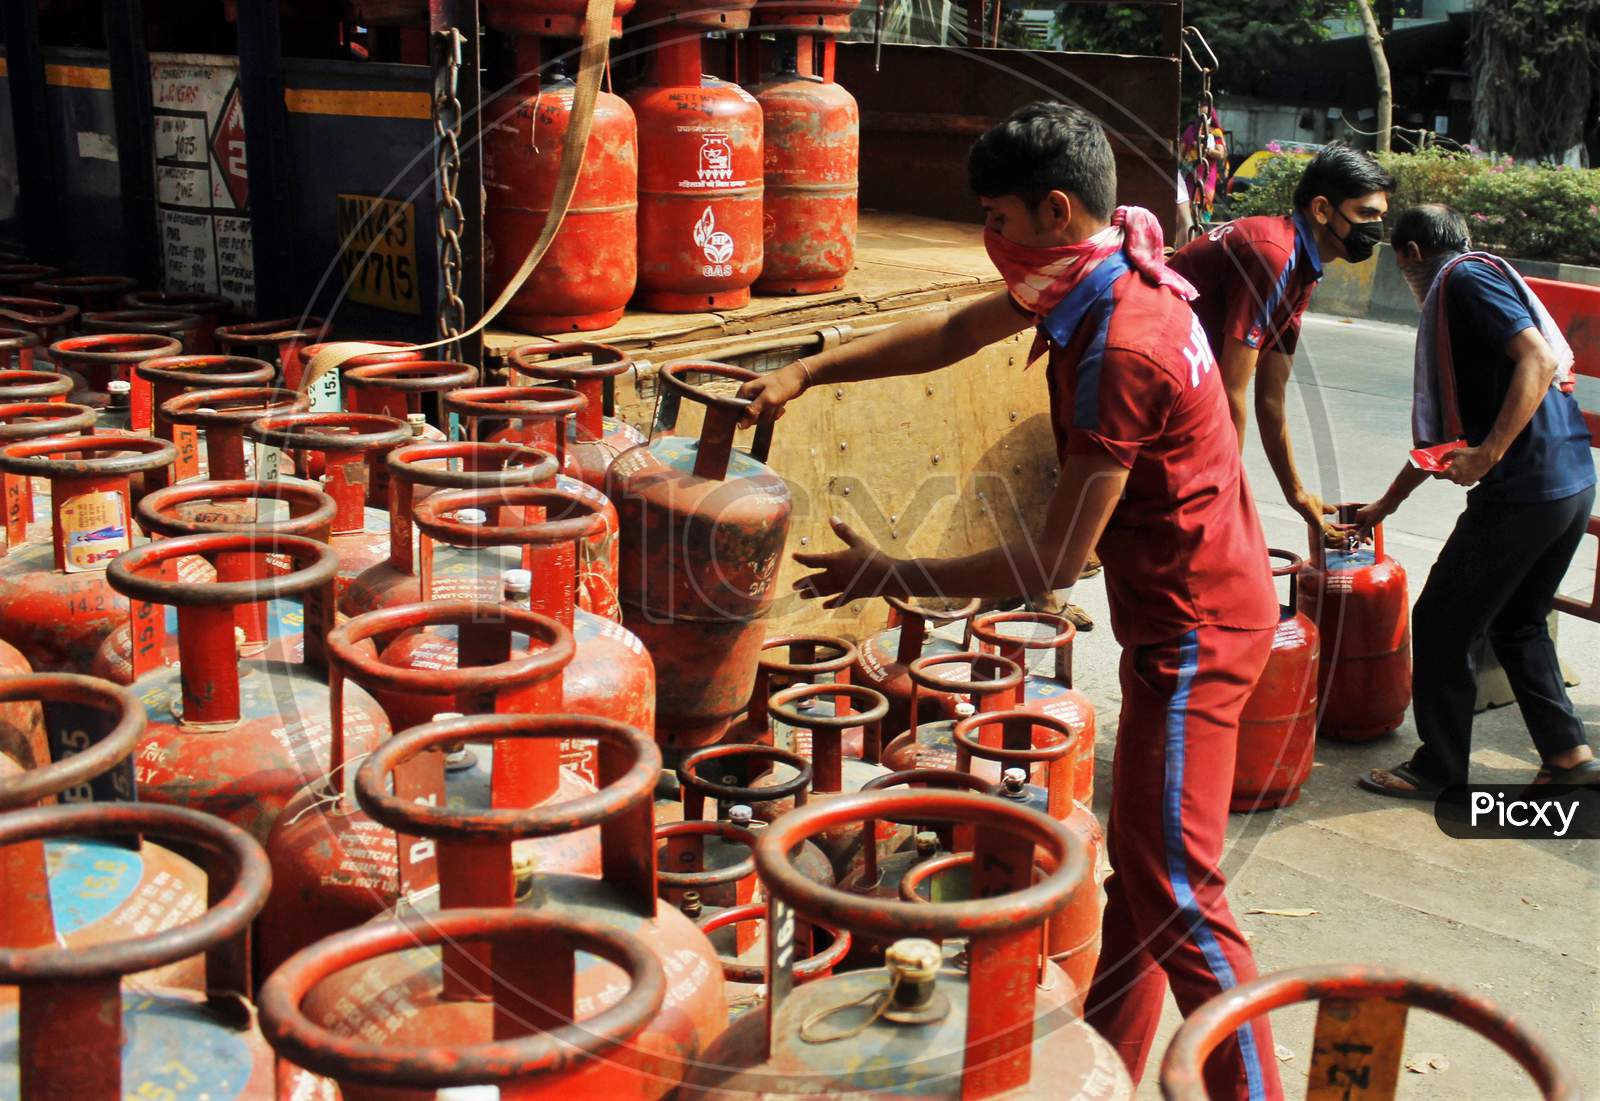 A worker unloads LPG gas cylinders from a vehicle for the people to purchase, after India ordered a 21- day nationwide lockdown to limit the spreading of coronavirus disease (COVID-19) in Mumbai, India on March 27, 2020.